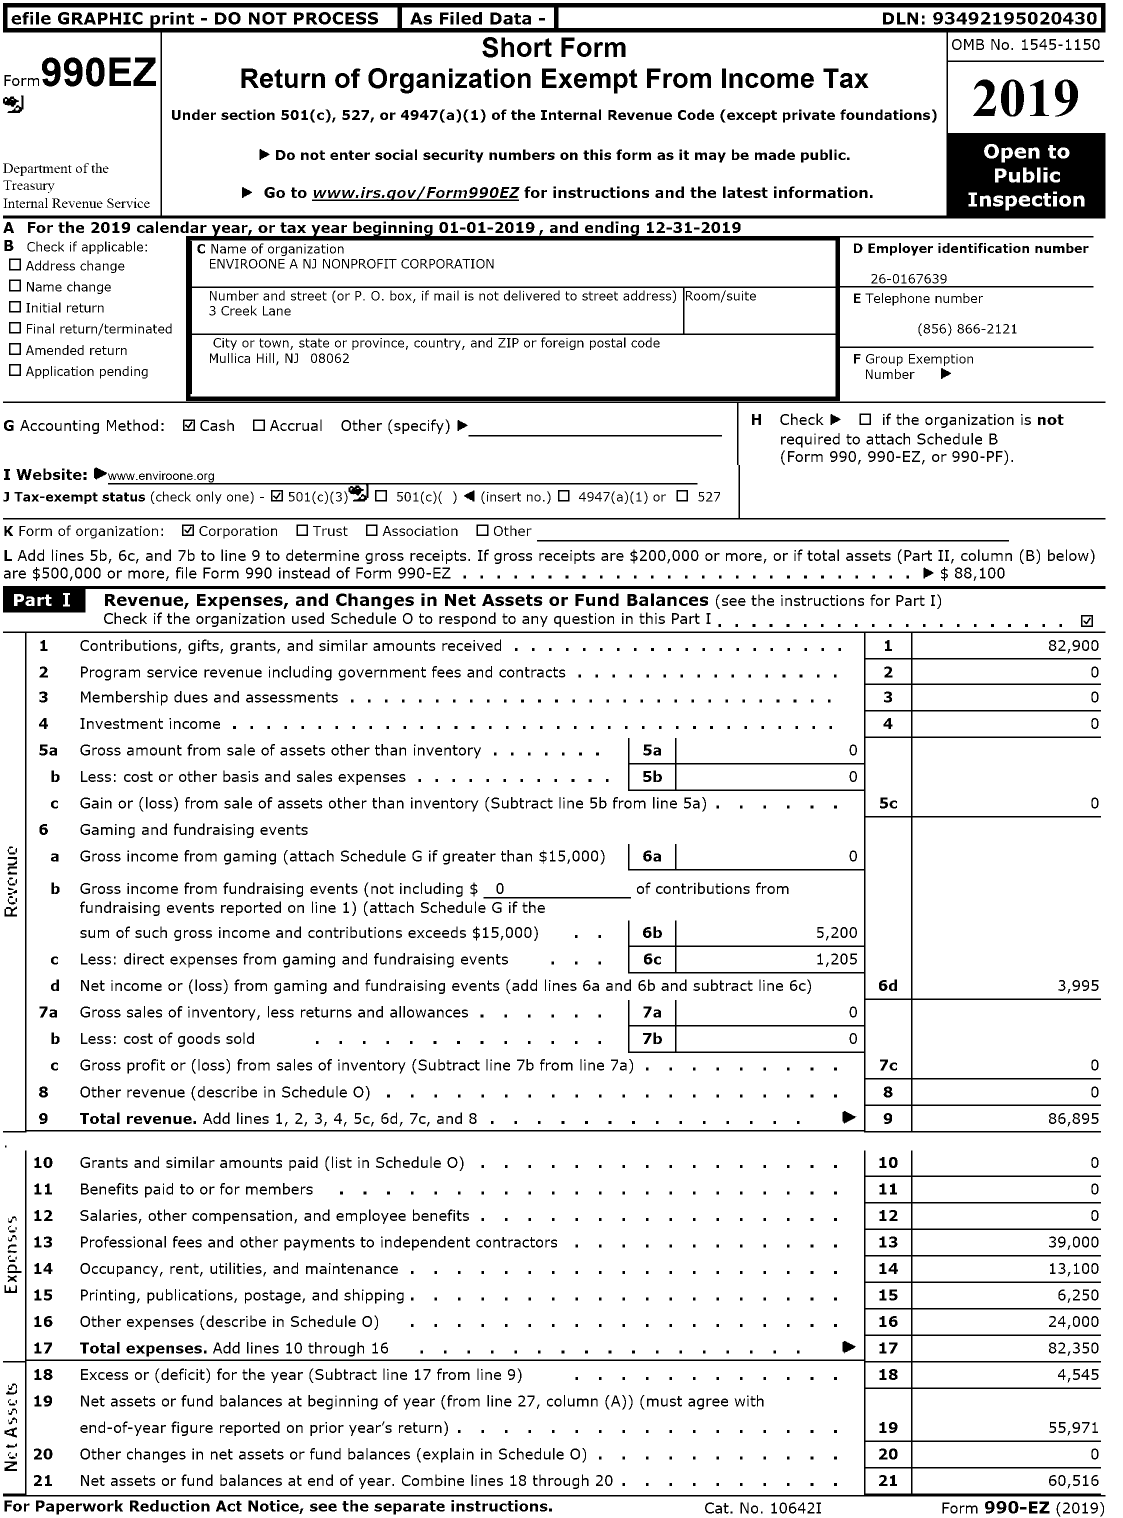 Image of first page of 2019 Form 990EZ for Enviroone A NJ Nonprofit Corporation